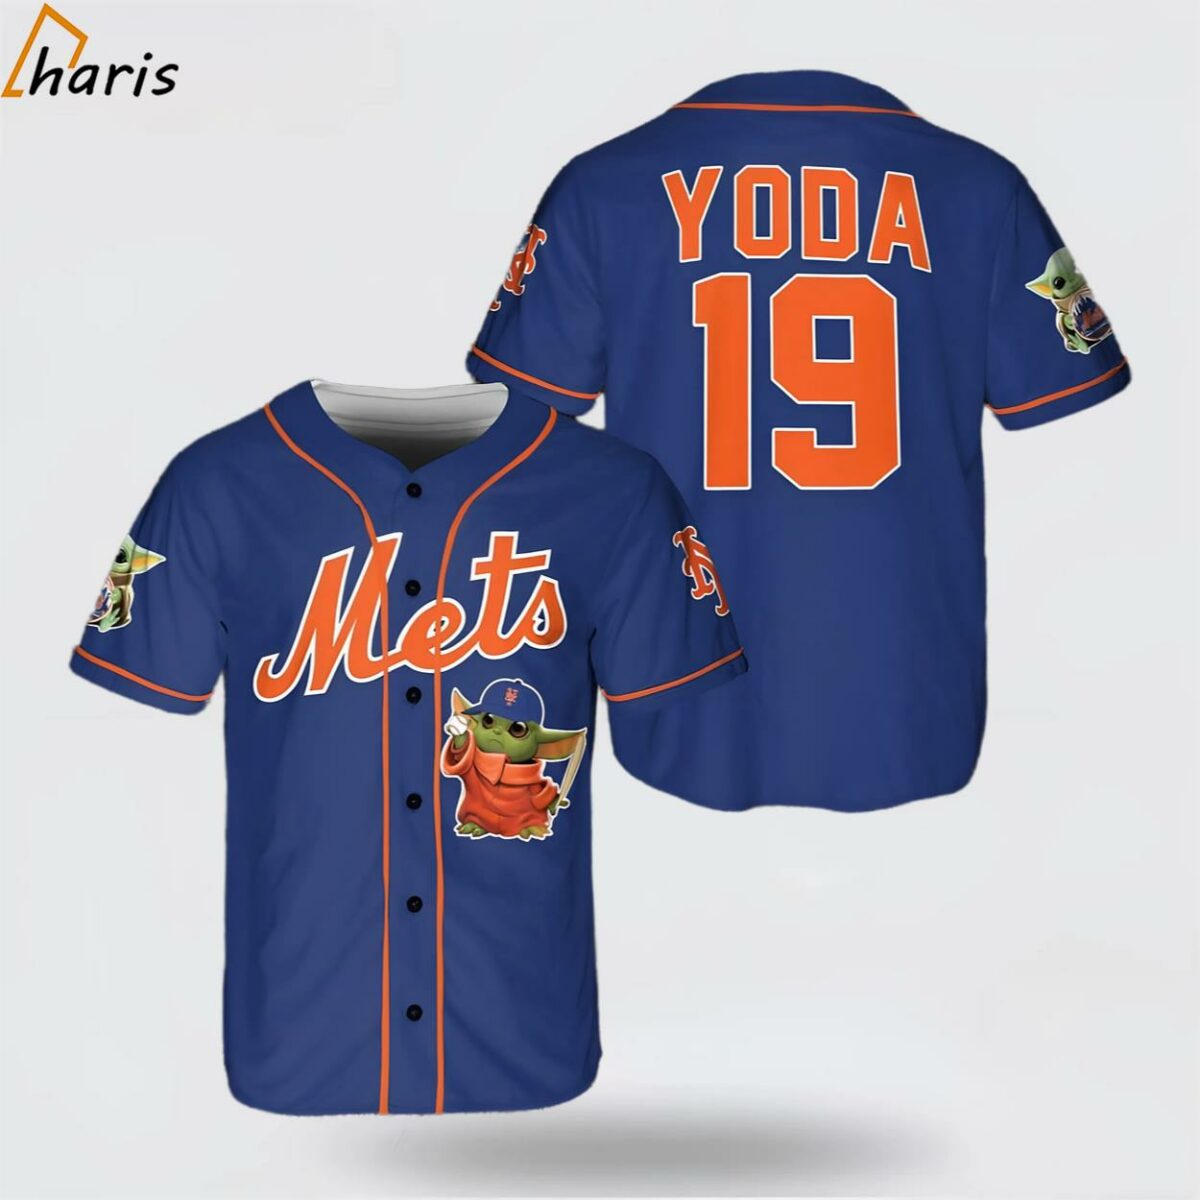 New York Mets Baseball Jersey For Fans 1 jersey